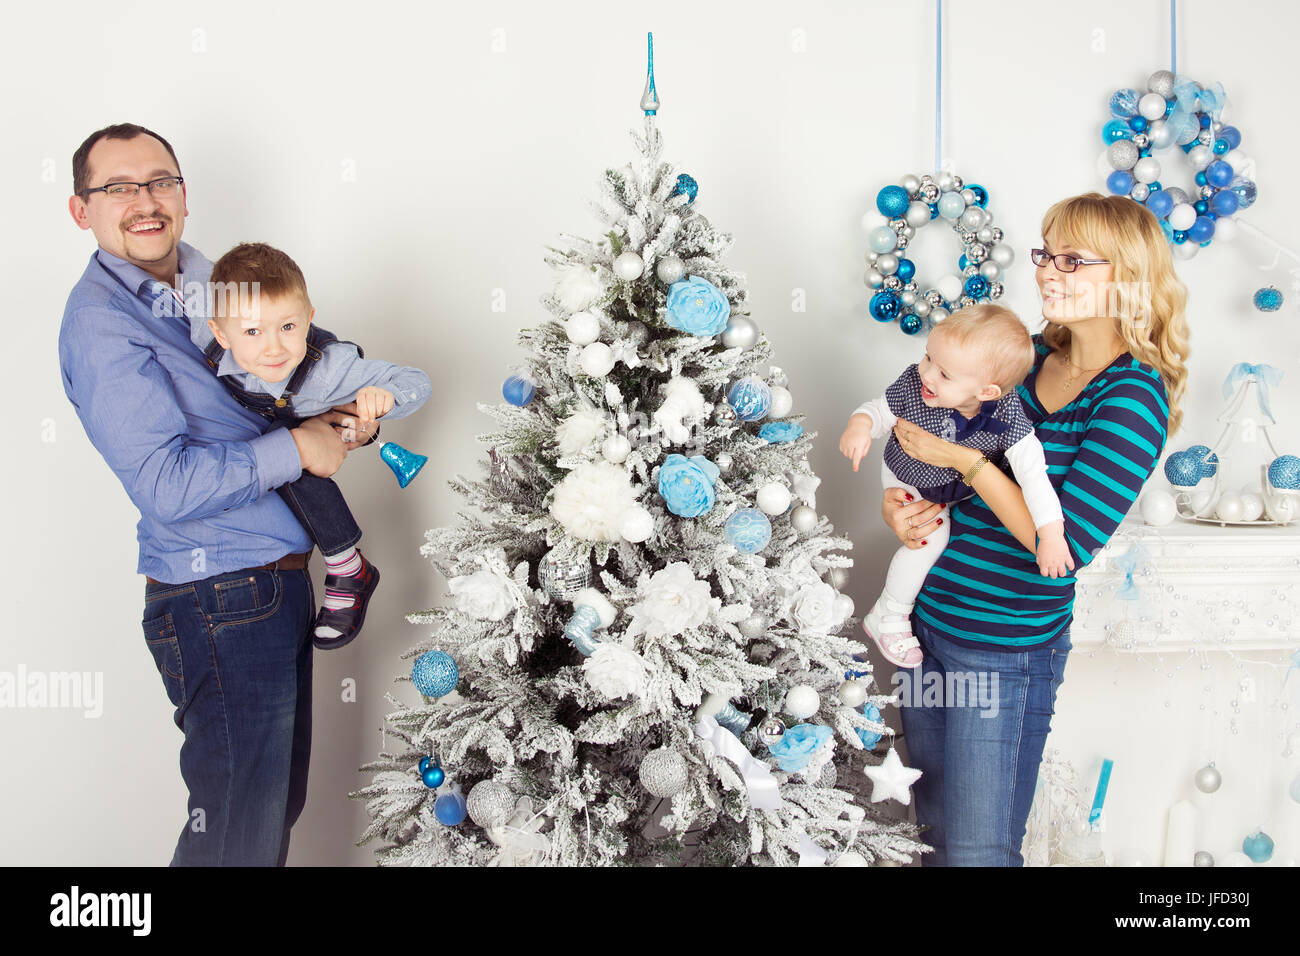 Happy family of four persons (mother, father, son, daughter) decorating christmas tree Stock Photo